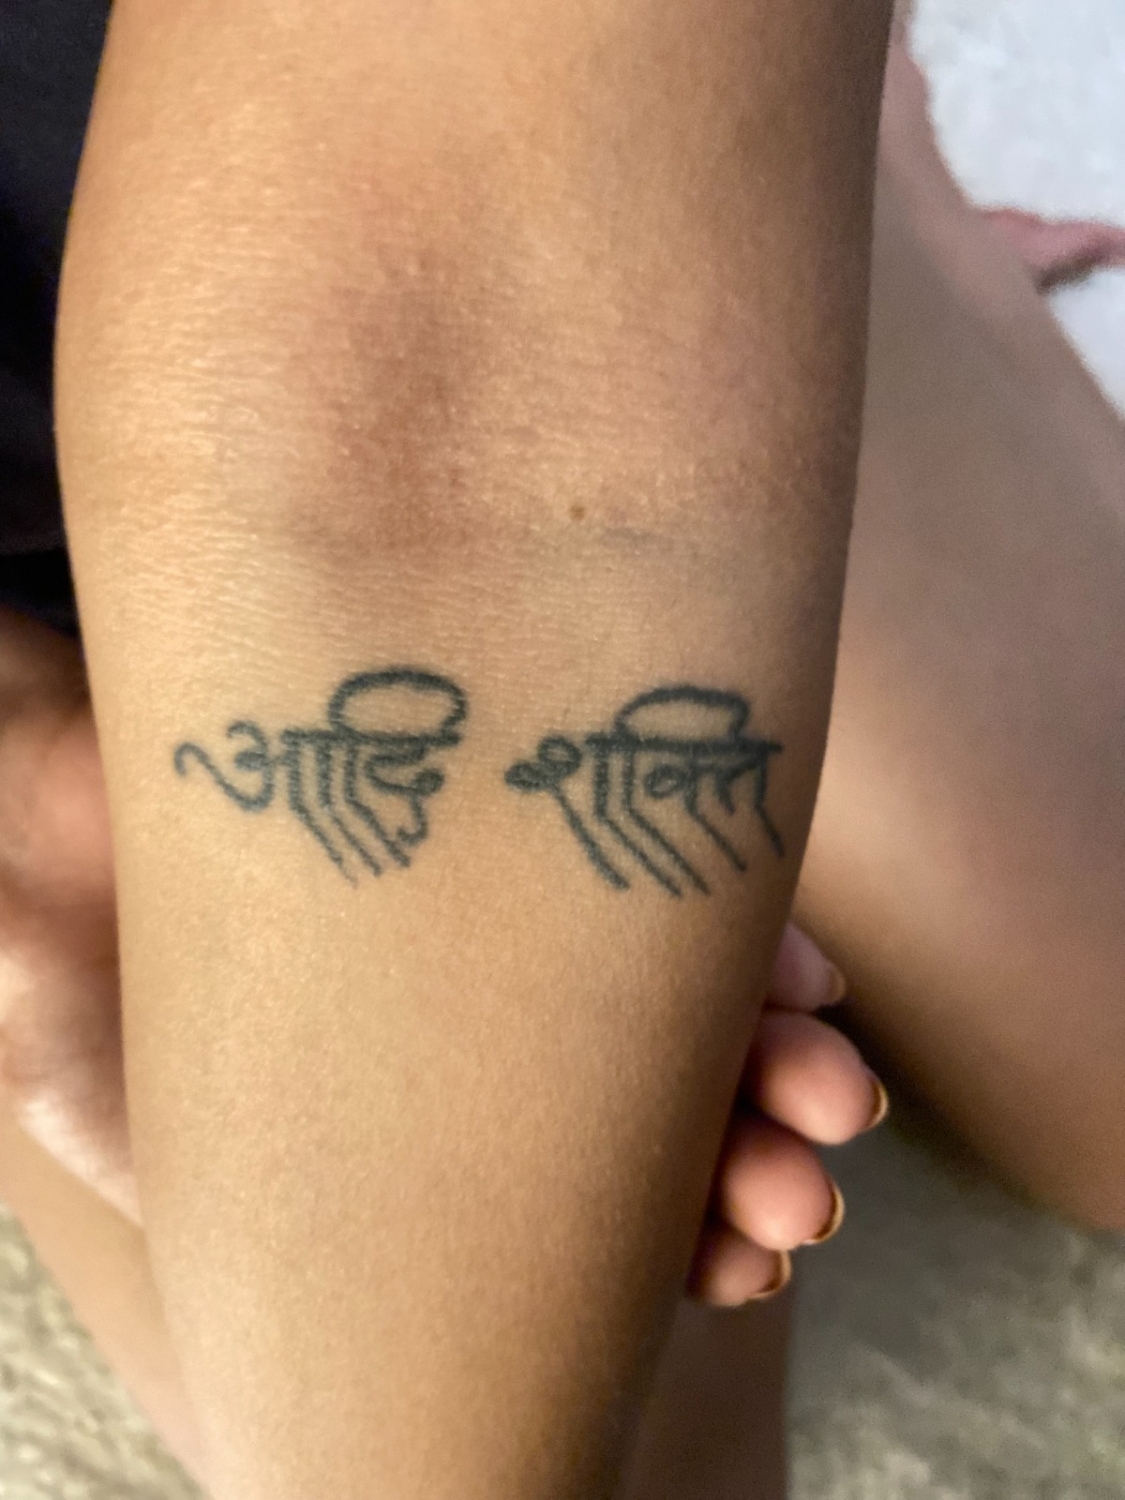 LORD SHIVA TATTOOS  One Of Indias Best Tattoo Studios In Bangalore   Eternal Expression  Best Tattoo Artist In Bangalore  Best Tattoo Parlour  In Bangalore  Best Tattoo Shop In Bangaloresince 2010